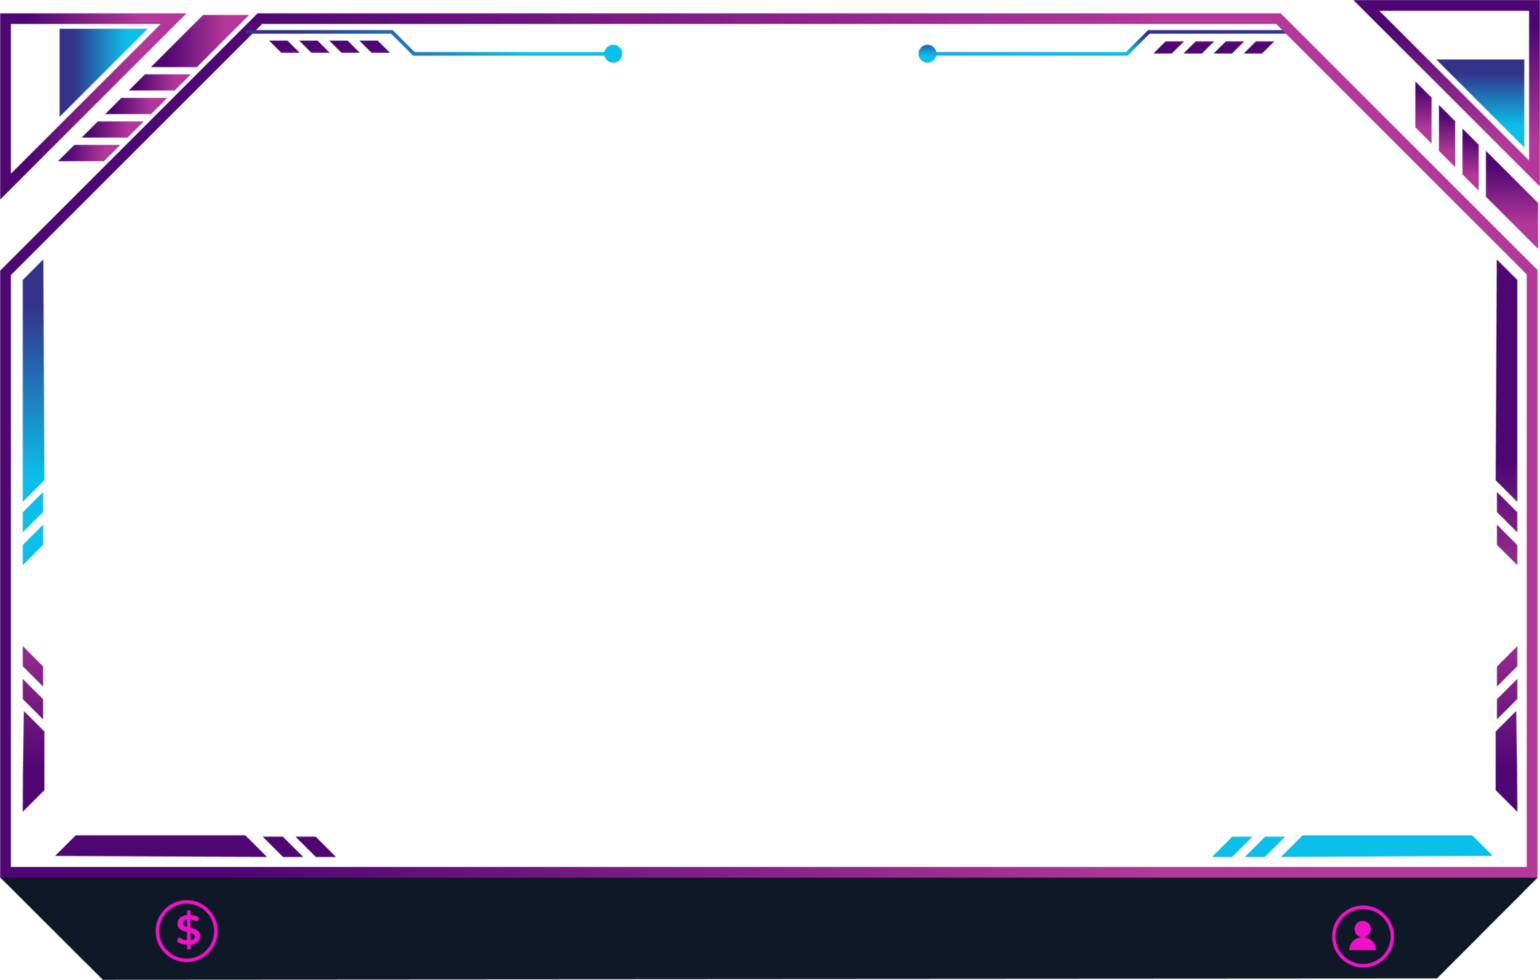 Digital online gaming overlay design with modern abstract shapes and transparent screen panels. Futuristic streaming overlay PNG for broadcast screens. Live gaming frame design with digital buttons.